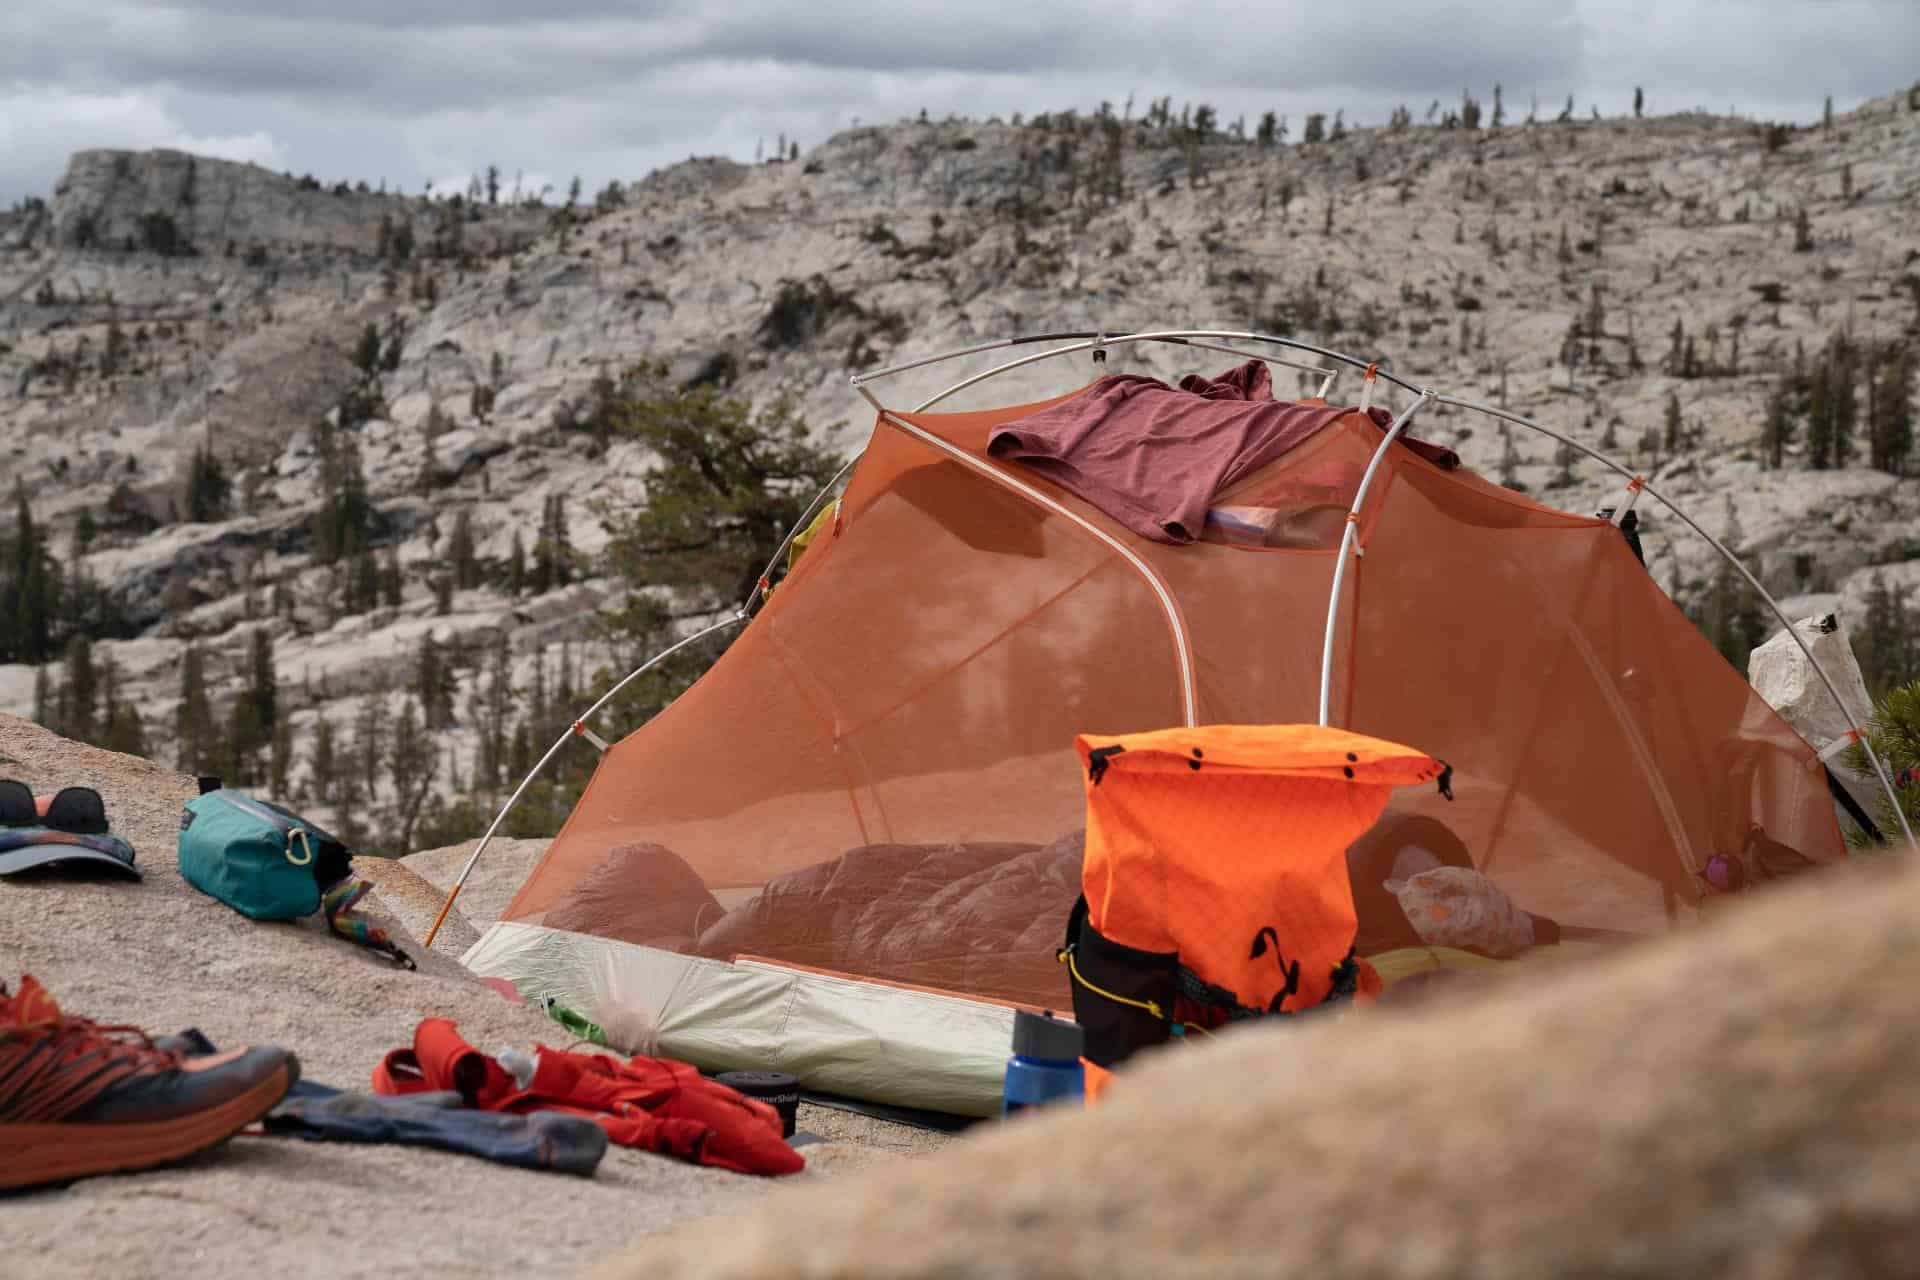 The Pacific Crest Trail Gear Guide: Class of 2022 Survey